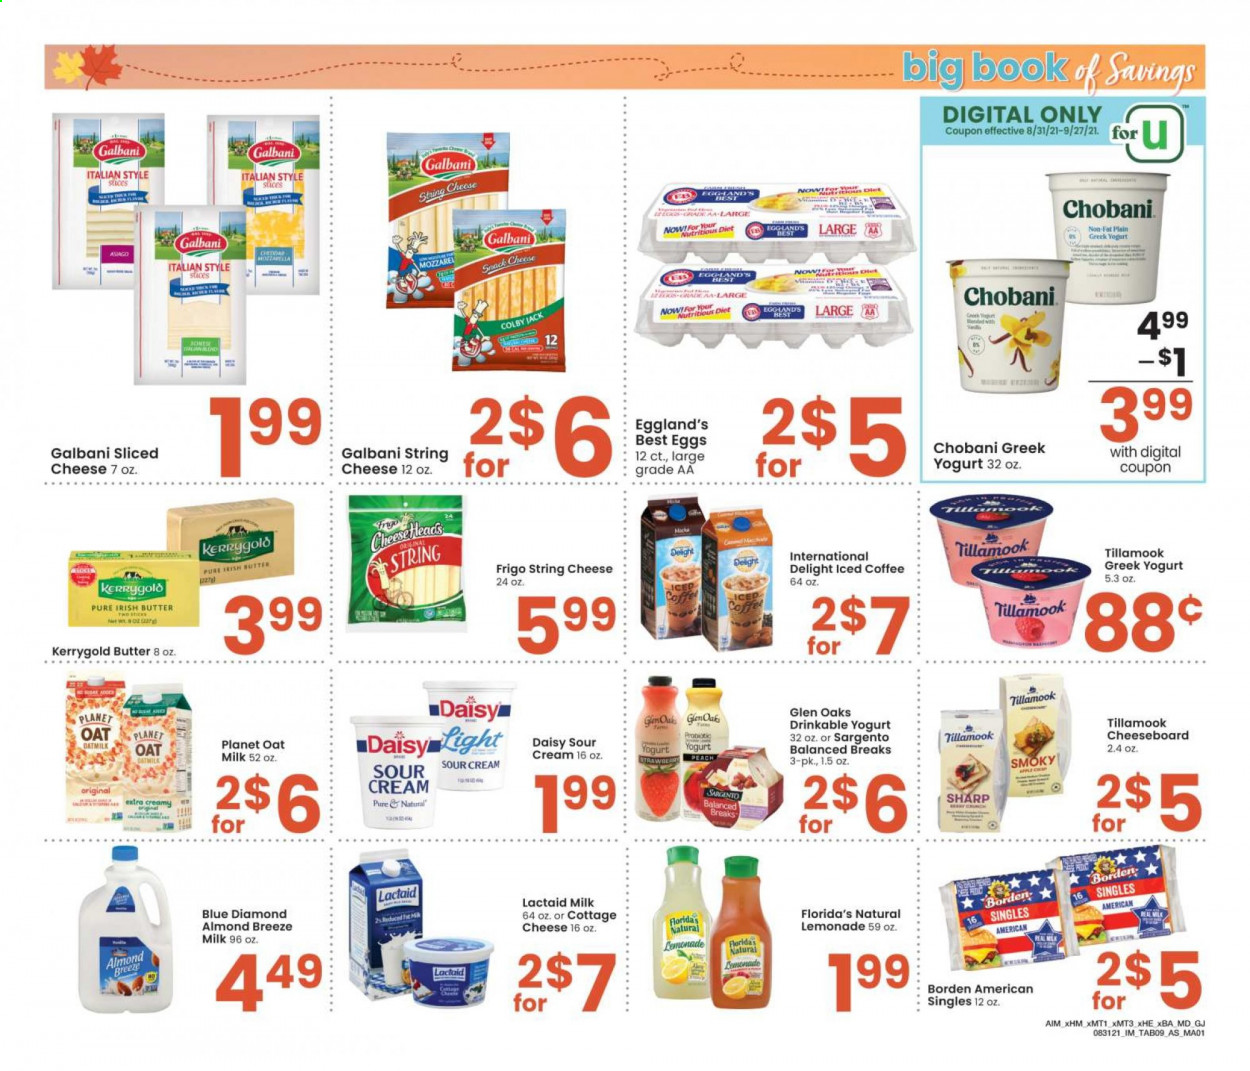 thumbnail - Albertsons Flyer - 08/31/2021 - 09/27/2021 - Sales products - Colby cheese, cottage cheese, Lactaid, mozzarella, sliced cheese, string cheese, cheese, Galbani, Sargento, greek yoghurt, yoghurt, Chobani, milk, Almond Breeze, oat milk, eggs, irish butter, sour cream, snack, Florida's Natural, Blue Diamond, lemonade, iced coffee, Sharp. Page 9.